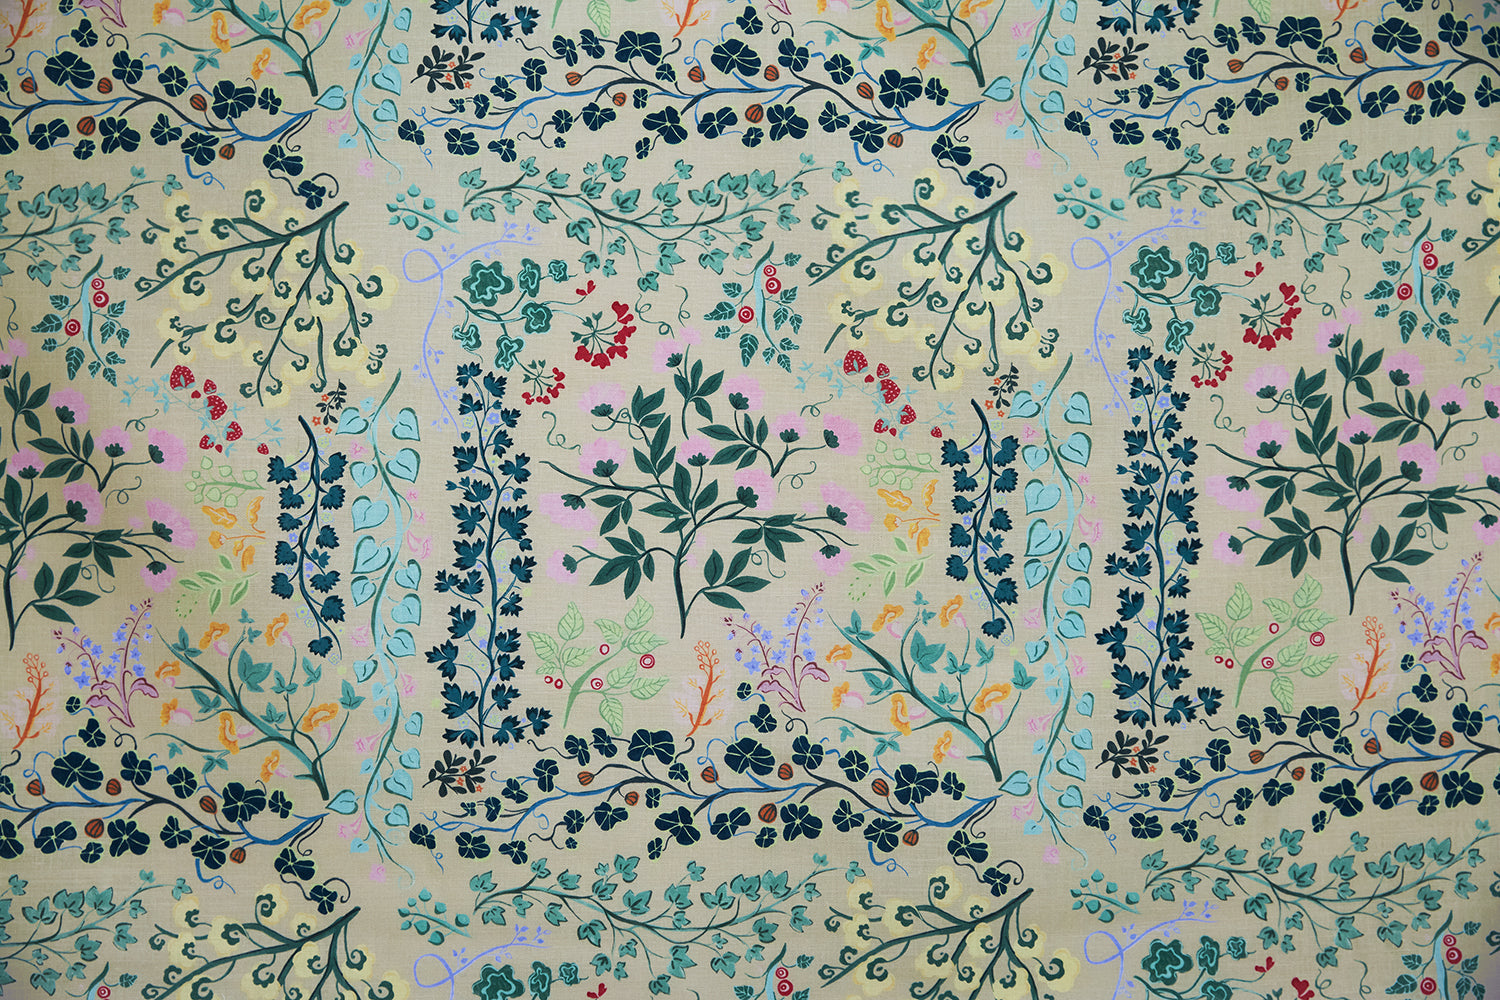 Detail of fabric in a dense floral print in shades of pink, yellow, green and black on a tan field.